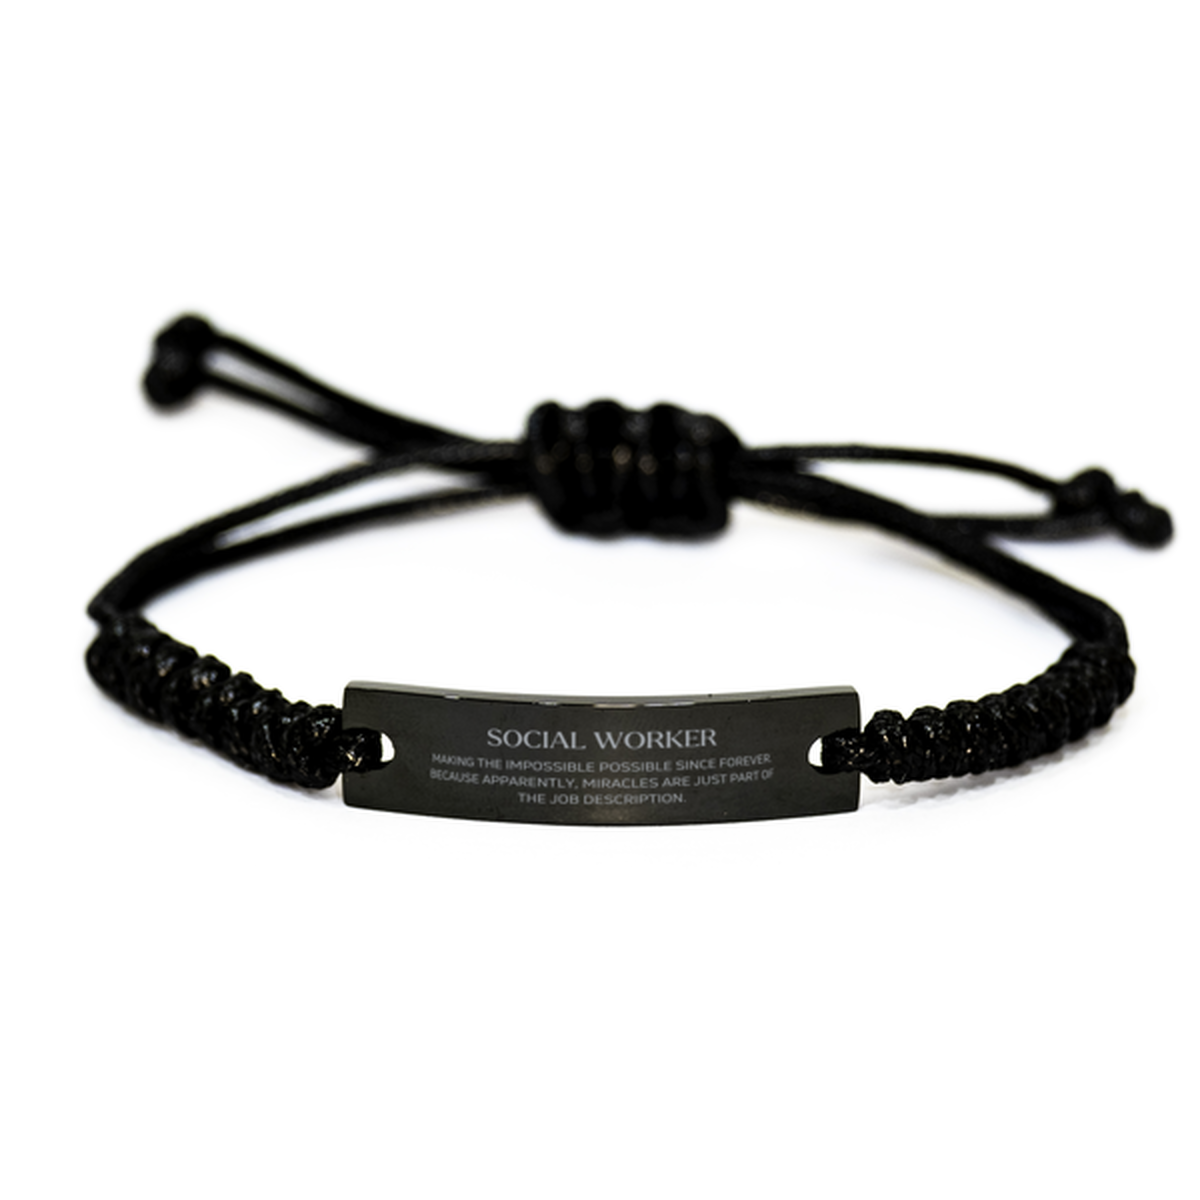 Funny Social Worker Gifts, Miracles are just part of the job description, Inspirational Birthday Black Rope Bracelet For Social Worker, Men, Women, Coworkers, Friends, Boss